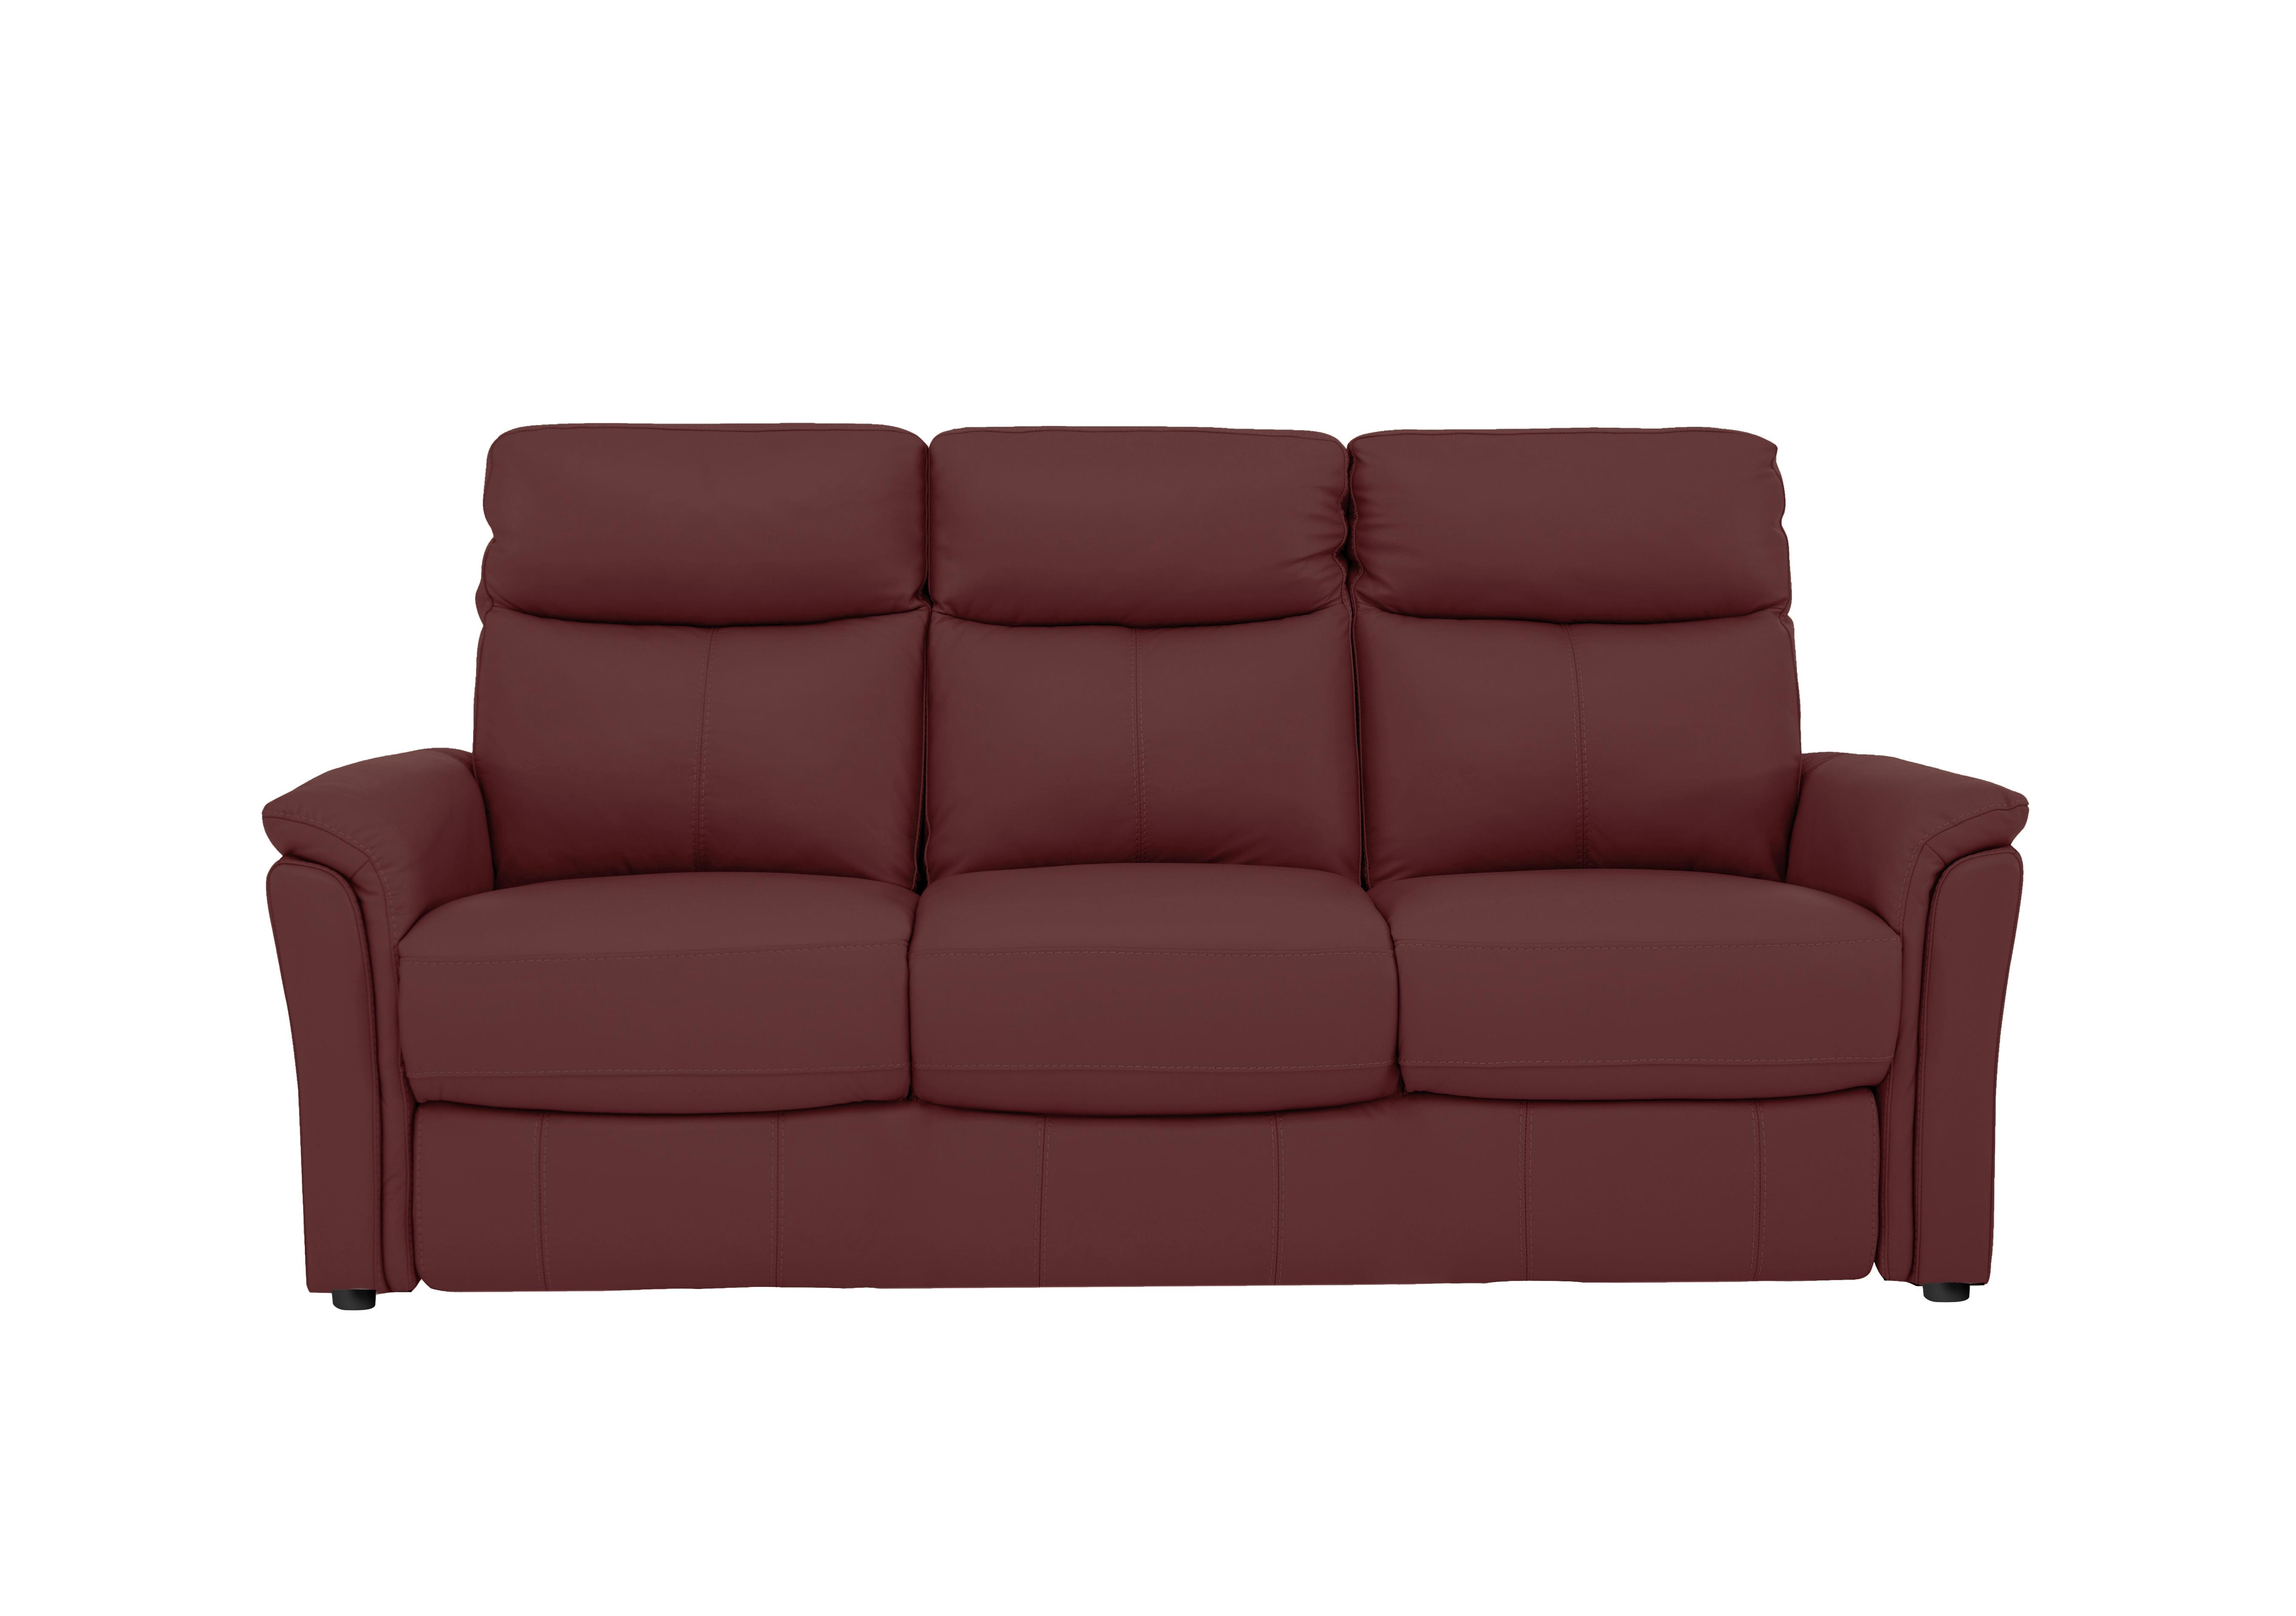 Compact Collection Piccolo 3 Seater Leather Static Sofa in Bv-035c Deep Red on Furniture Village